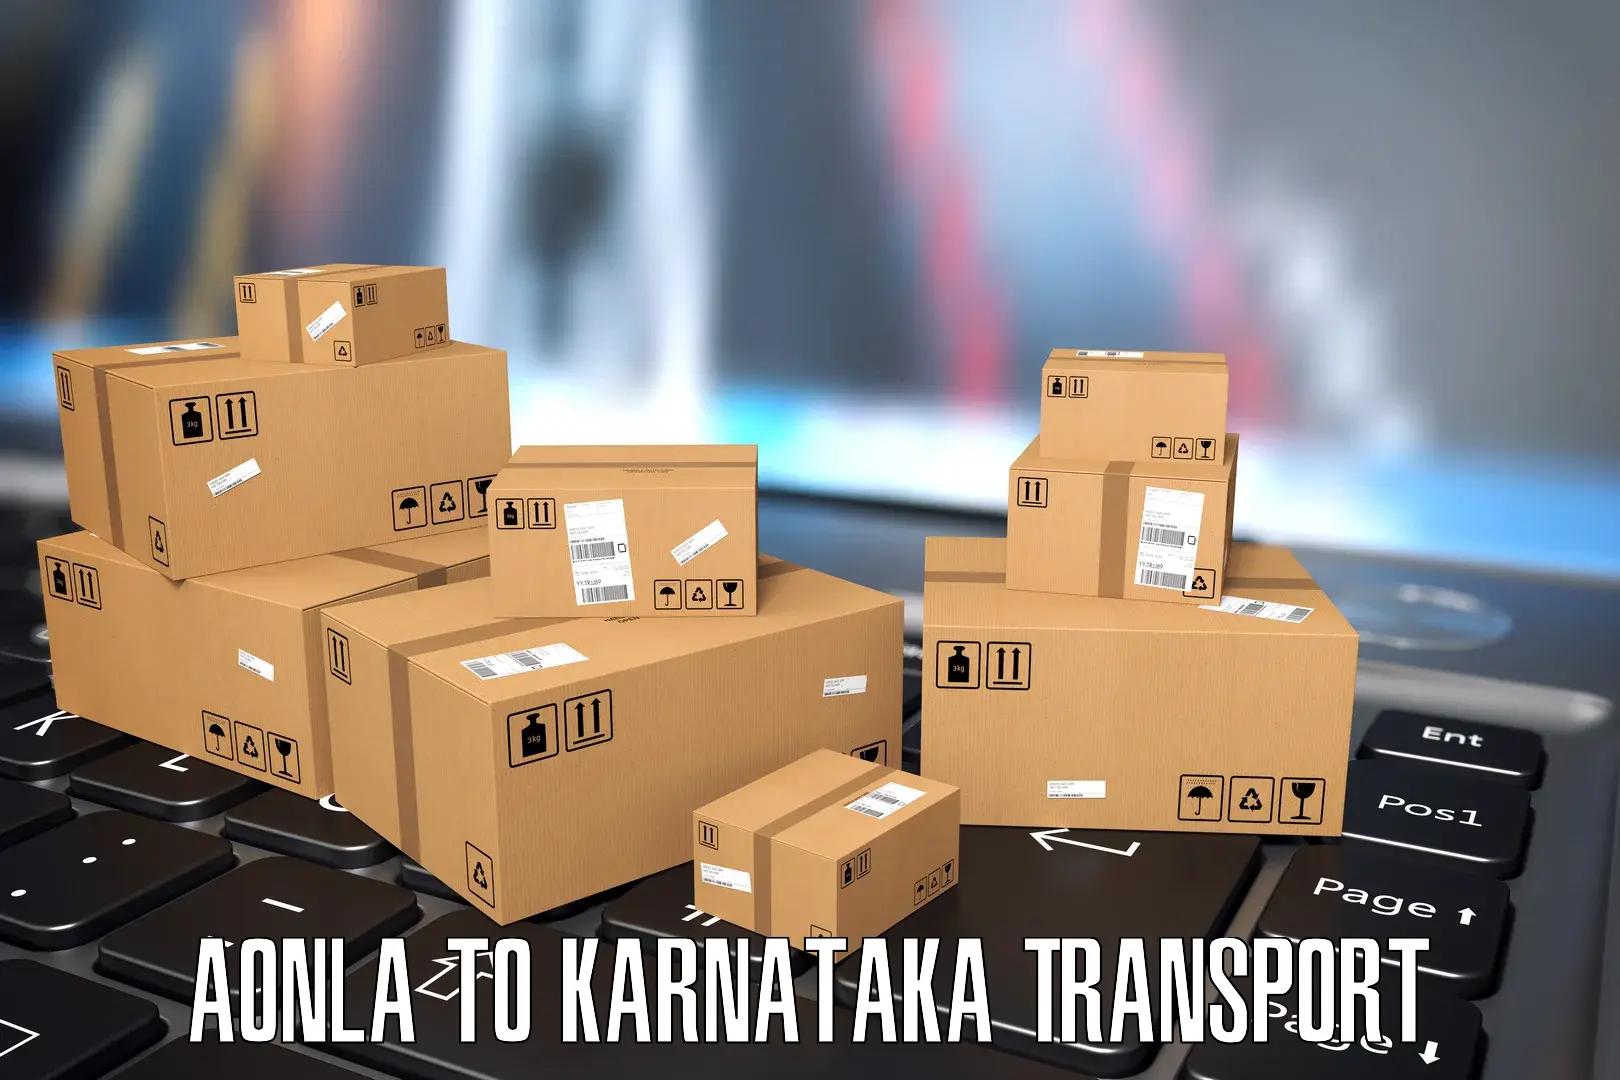 Transport bike from one state to another Aonla to Karnataka